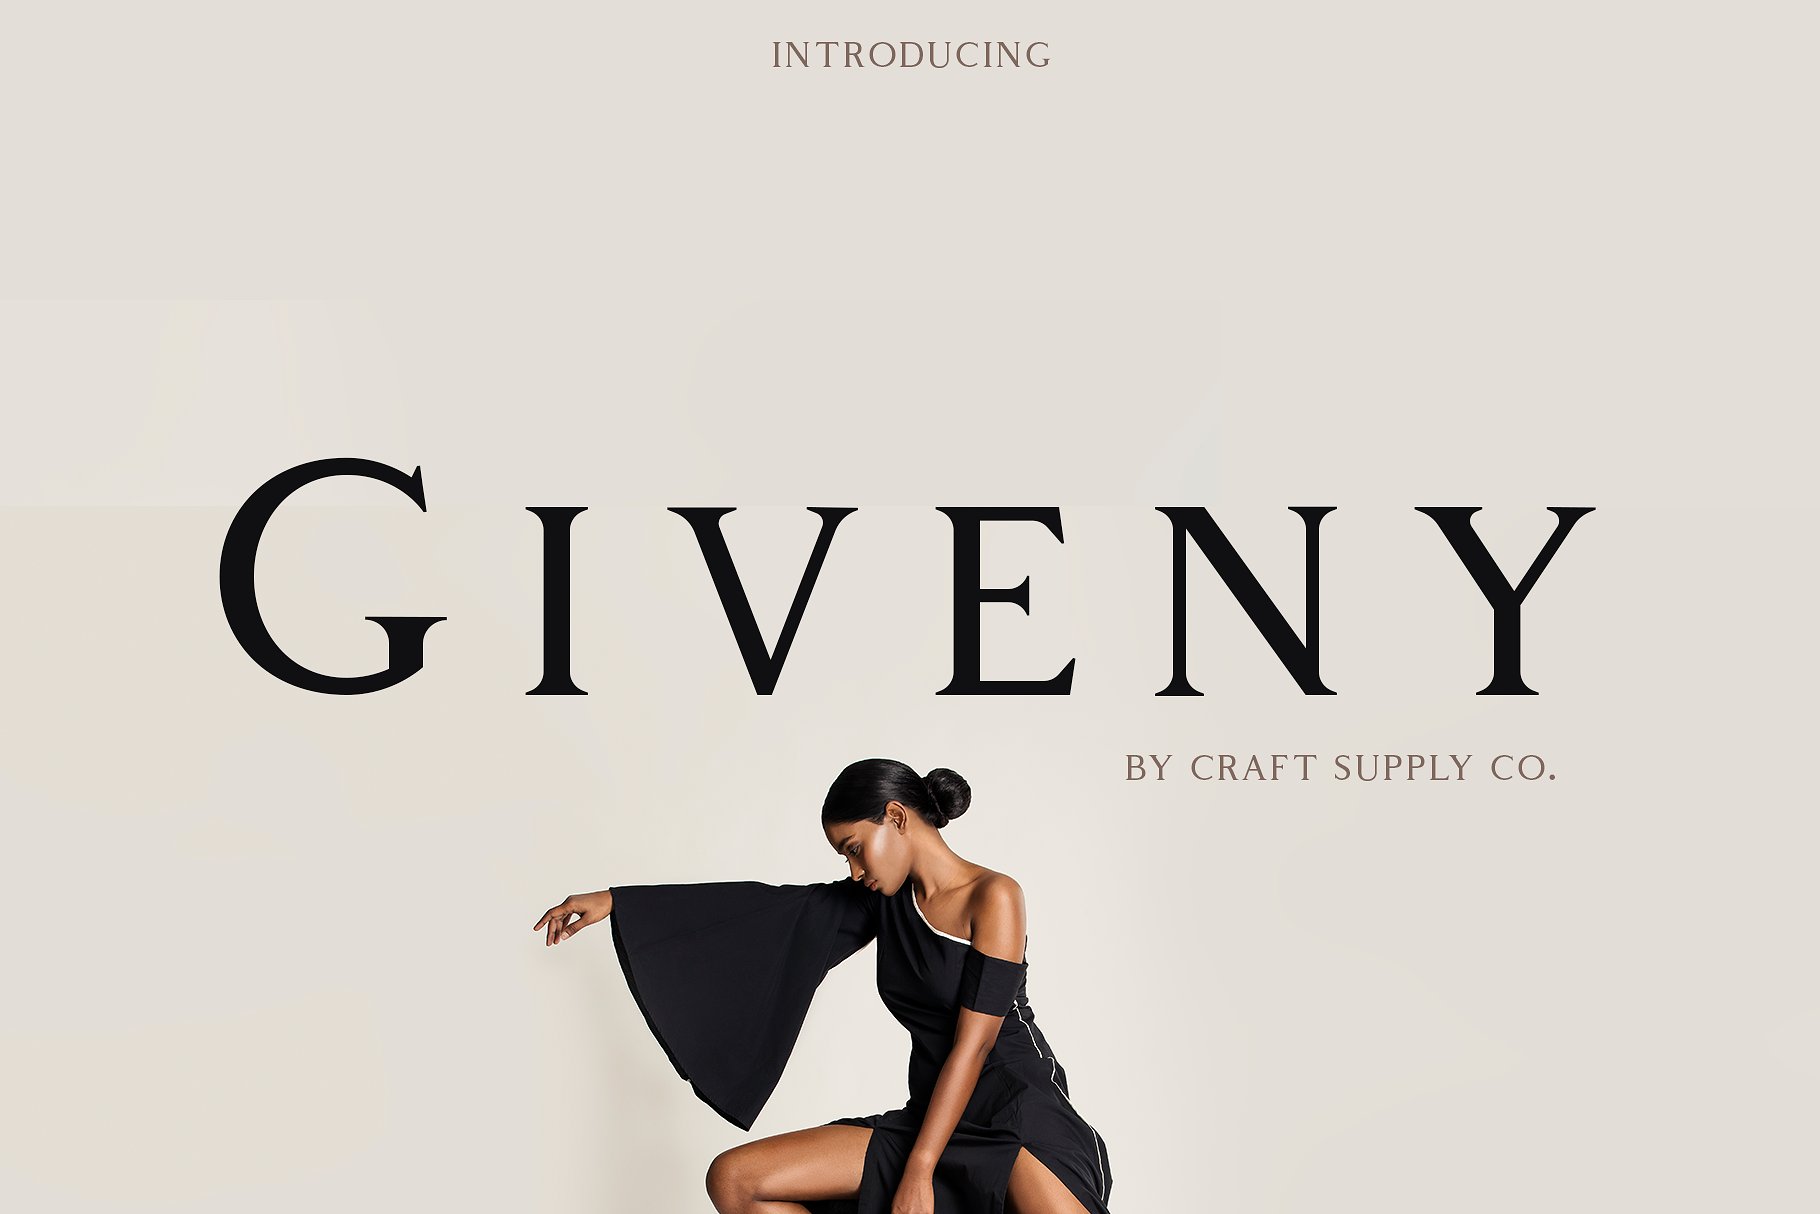 givenly